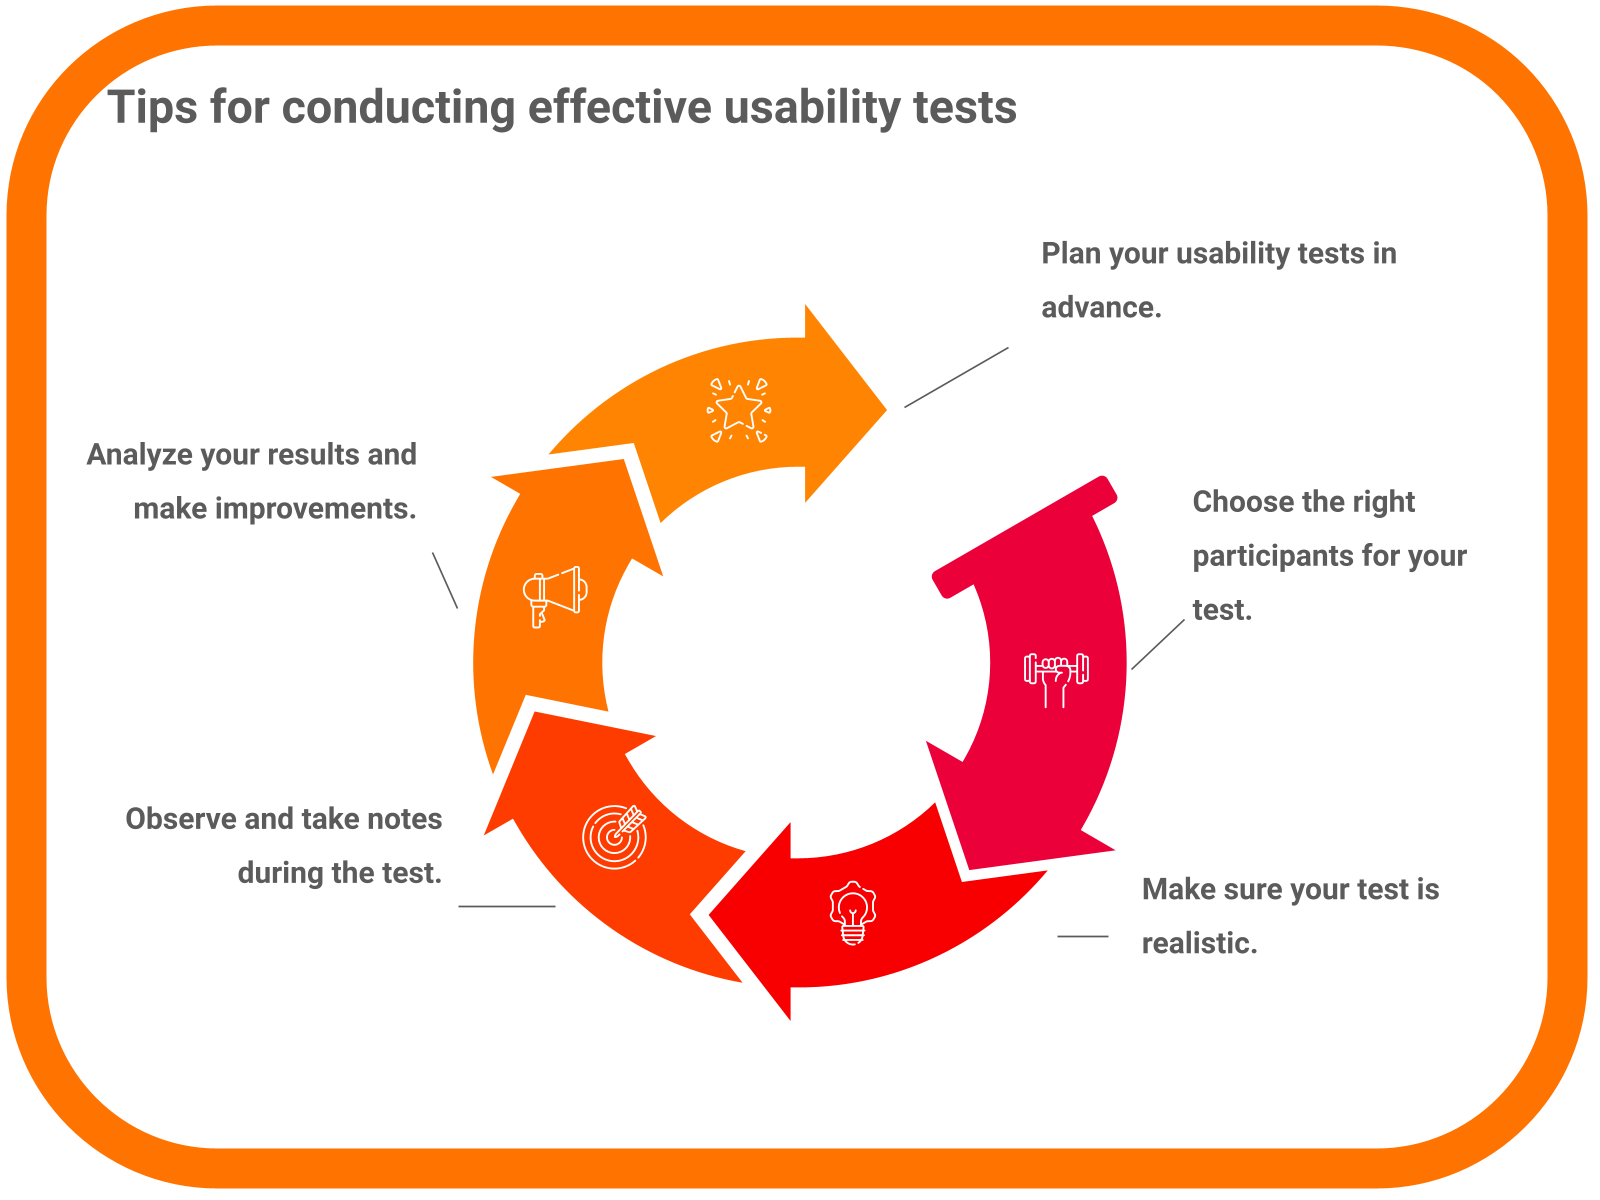 Tips for conducting effective usability testing for figma designs